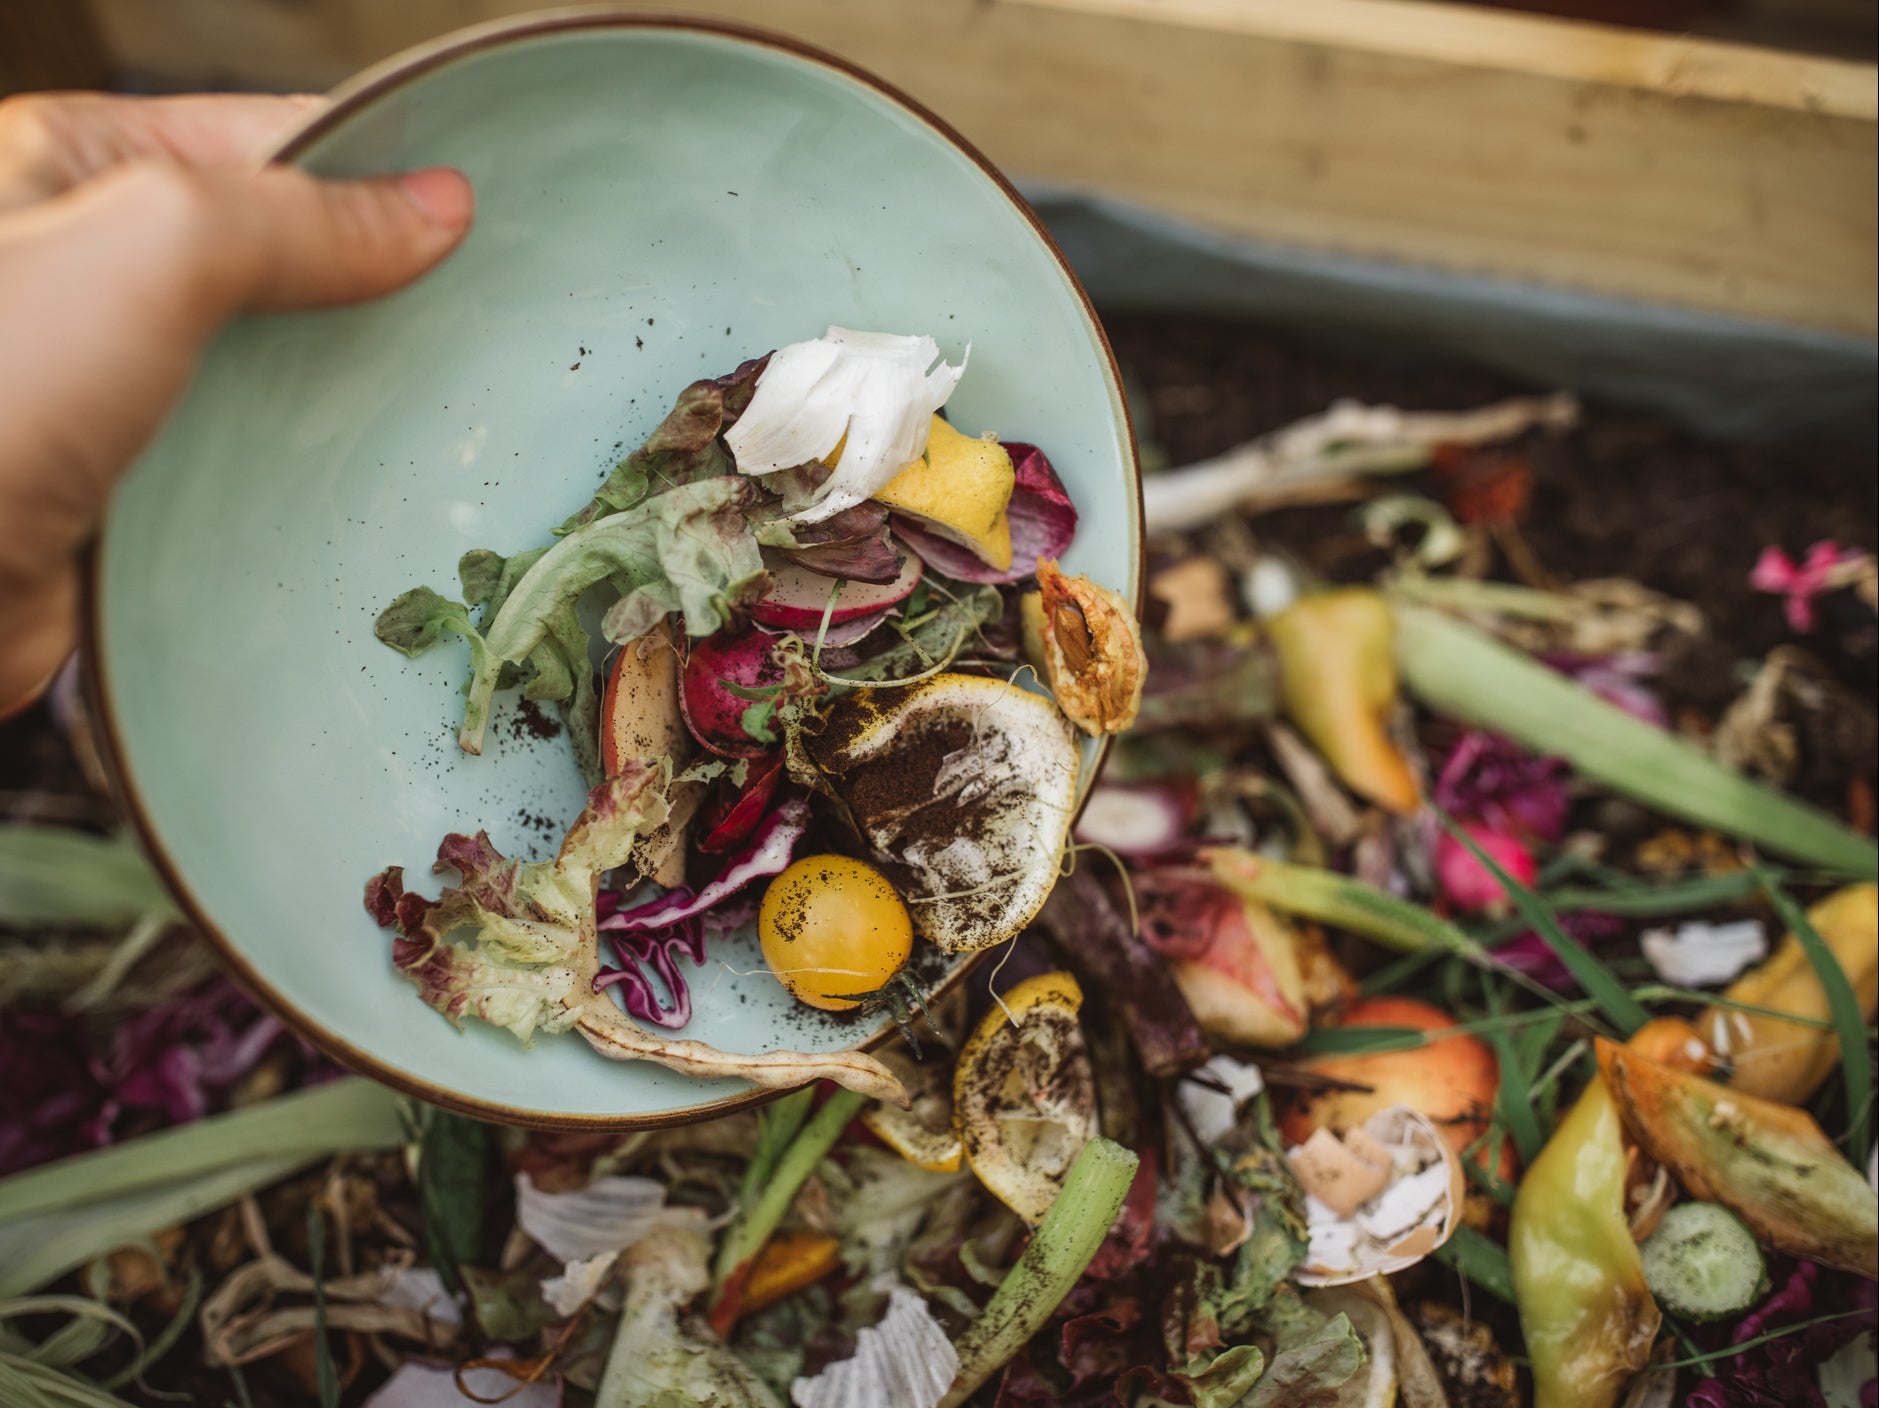 Food waste being turned to compost